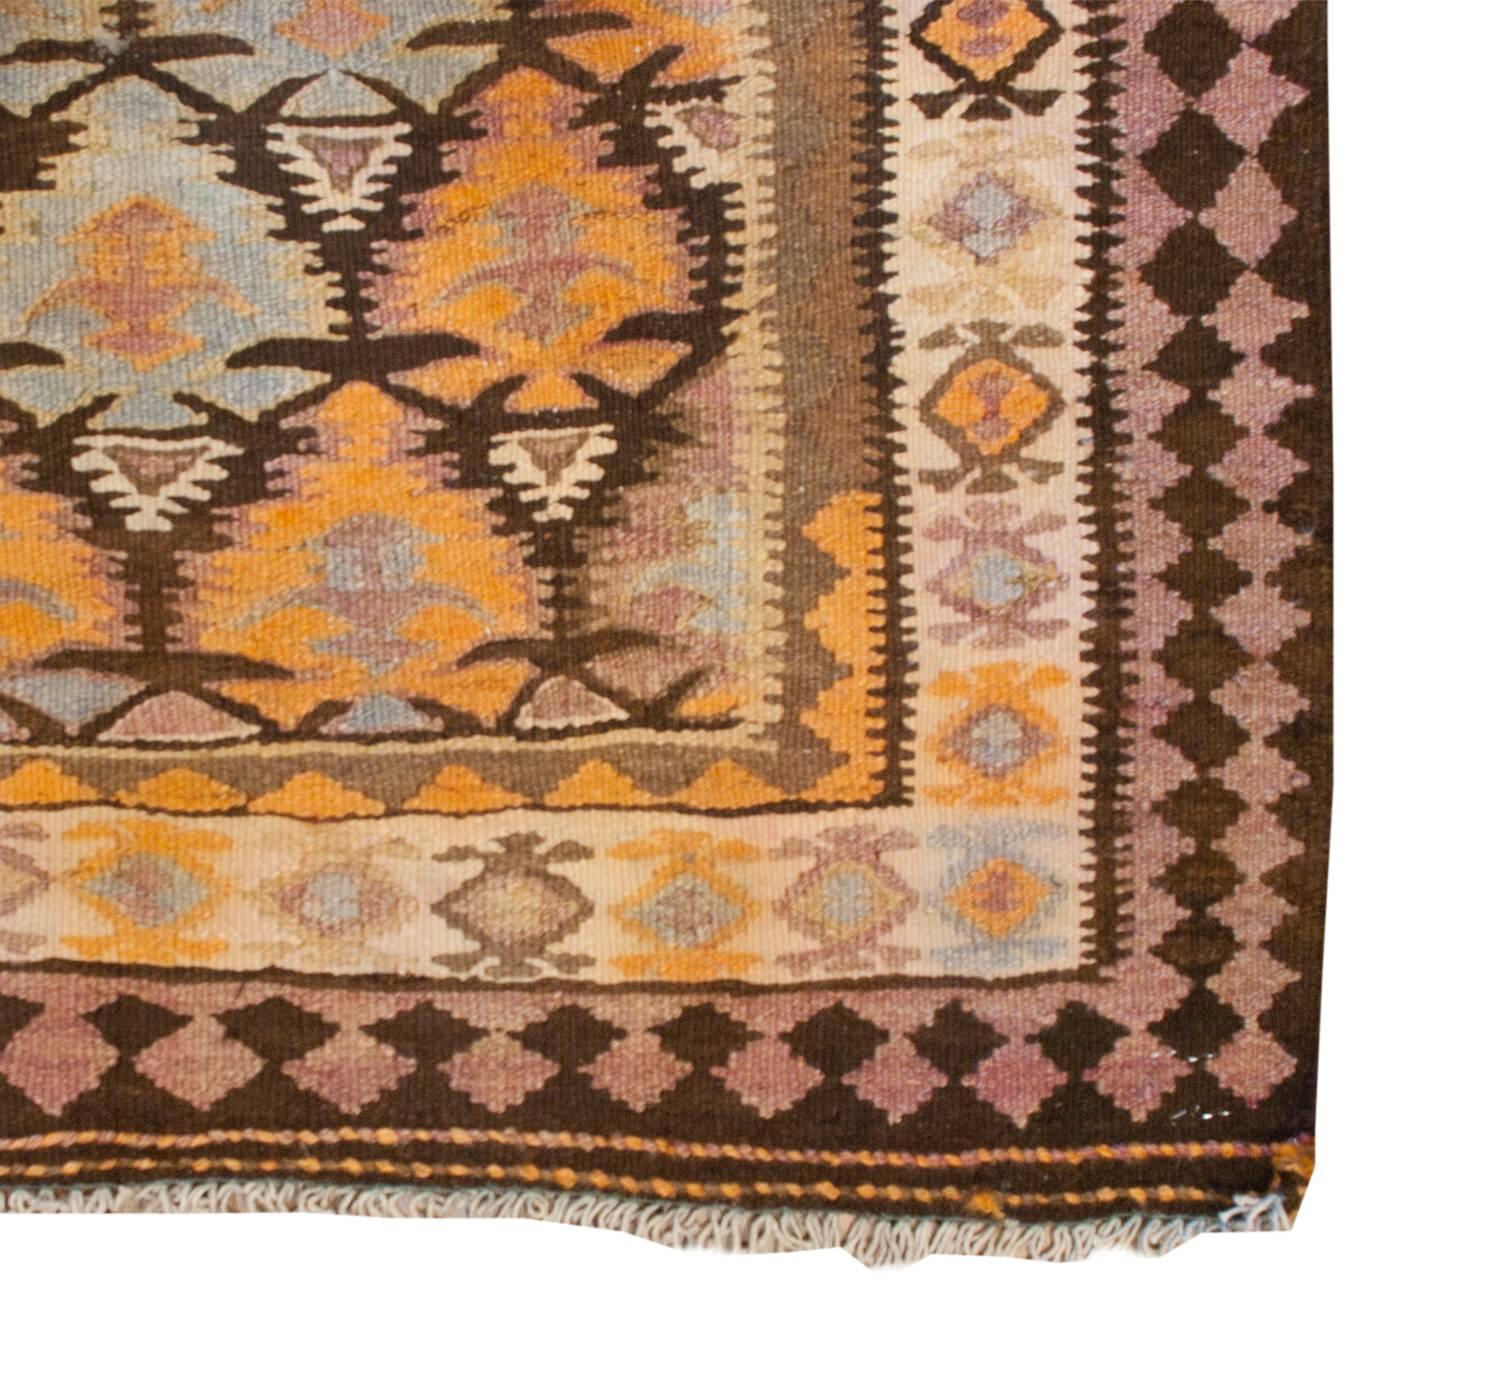 A wonderful early 20th century Persian Qazvin Kilim runner with a skillfully woven tree-of-life pattern with each tree having multicolored layers. Between the trees are white triangle forms. The border is comprised of three distinct patterns. The